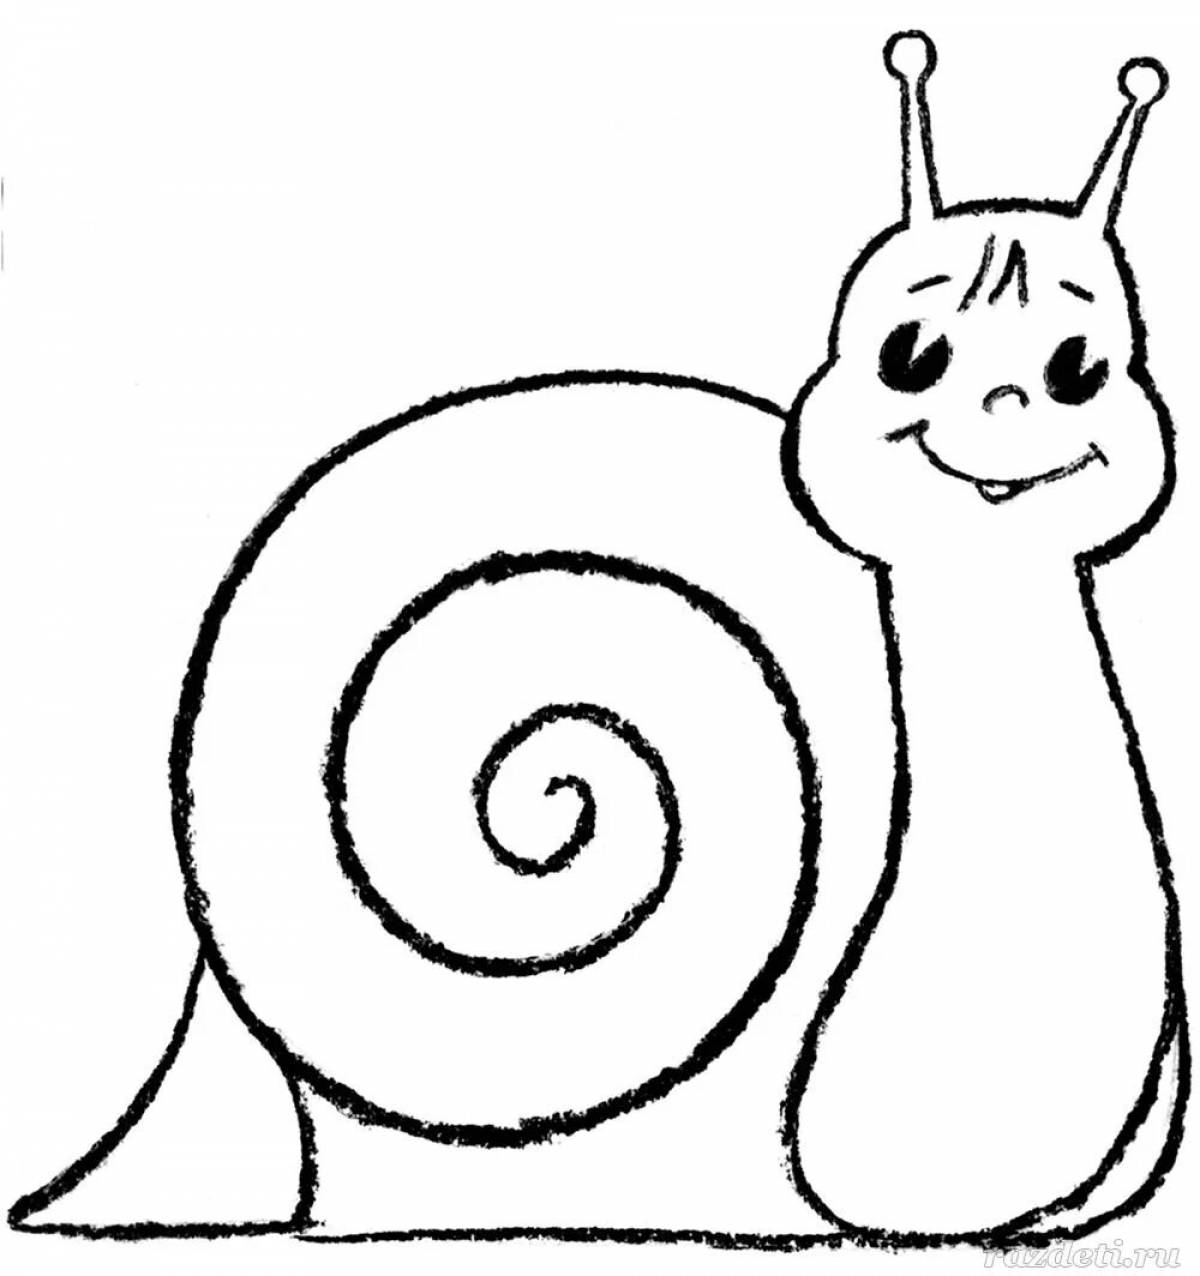 Snail for children 3 4 years old #5